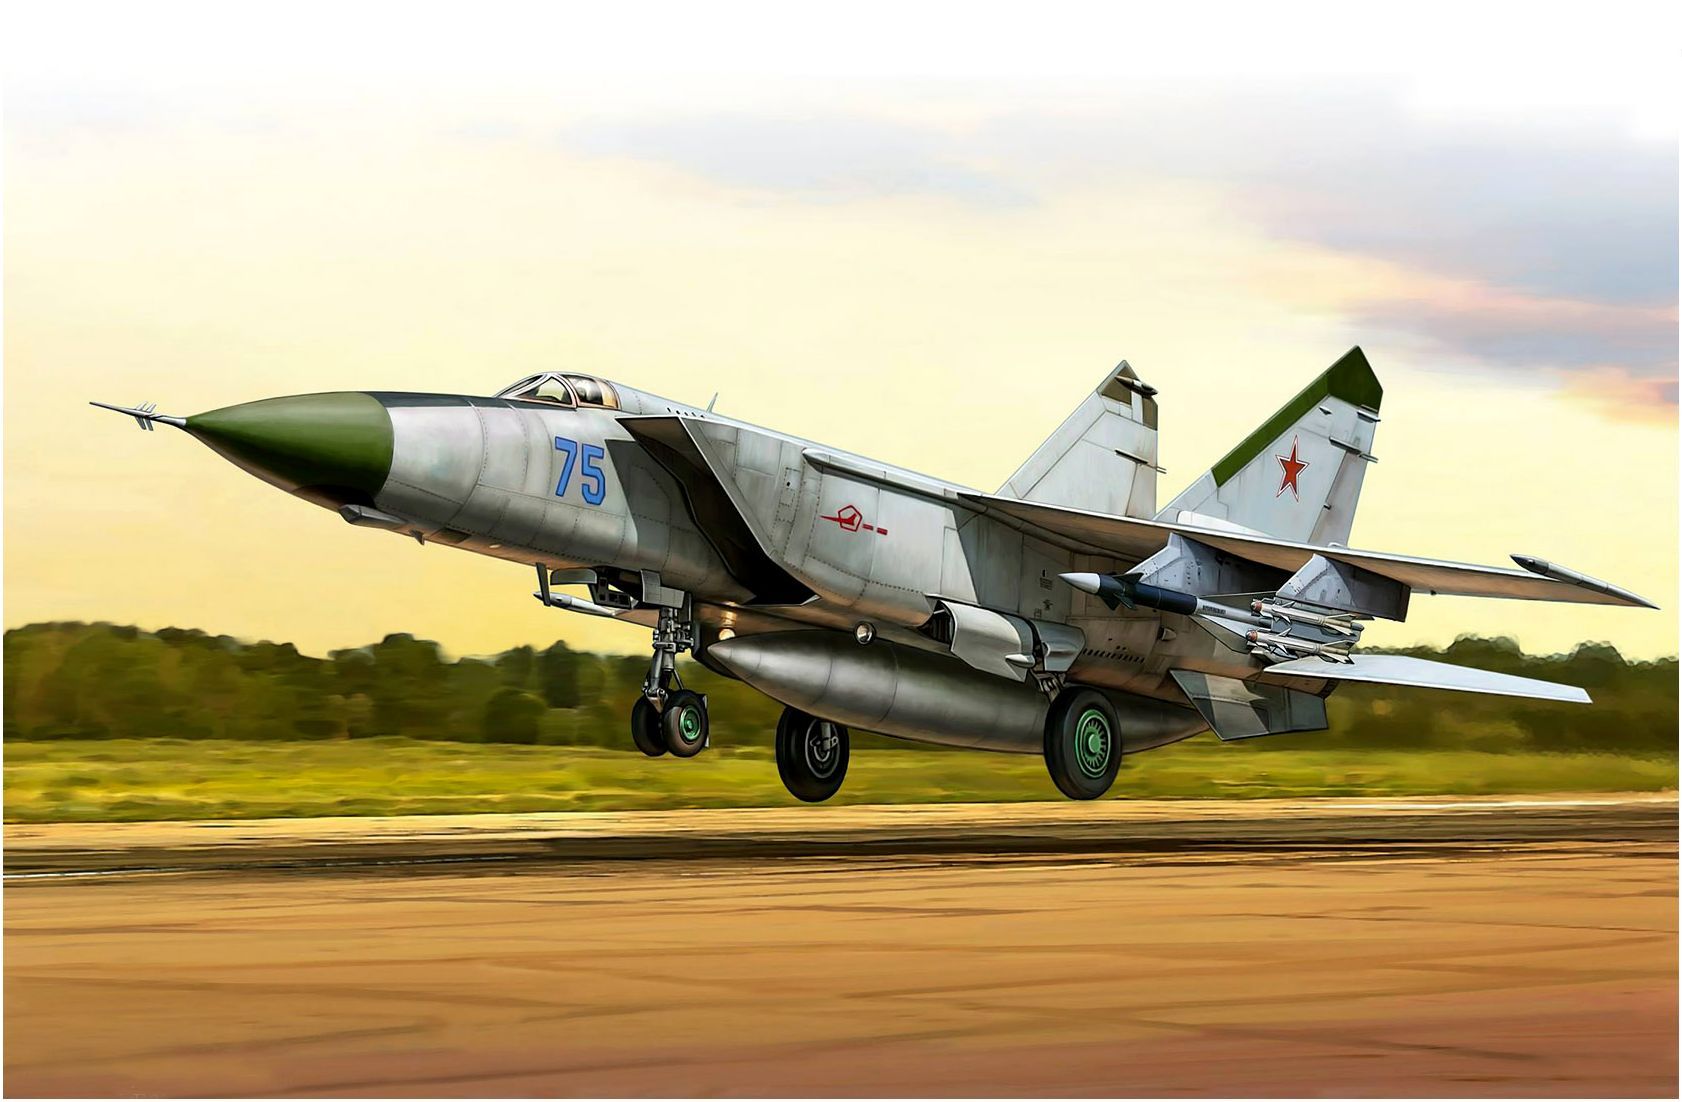 File:air-to-air right side view of a soviet mig-25 foxbat interceptor aircraft.jpg - wikimedia commons